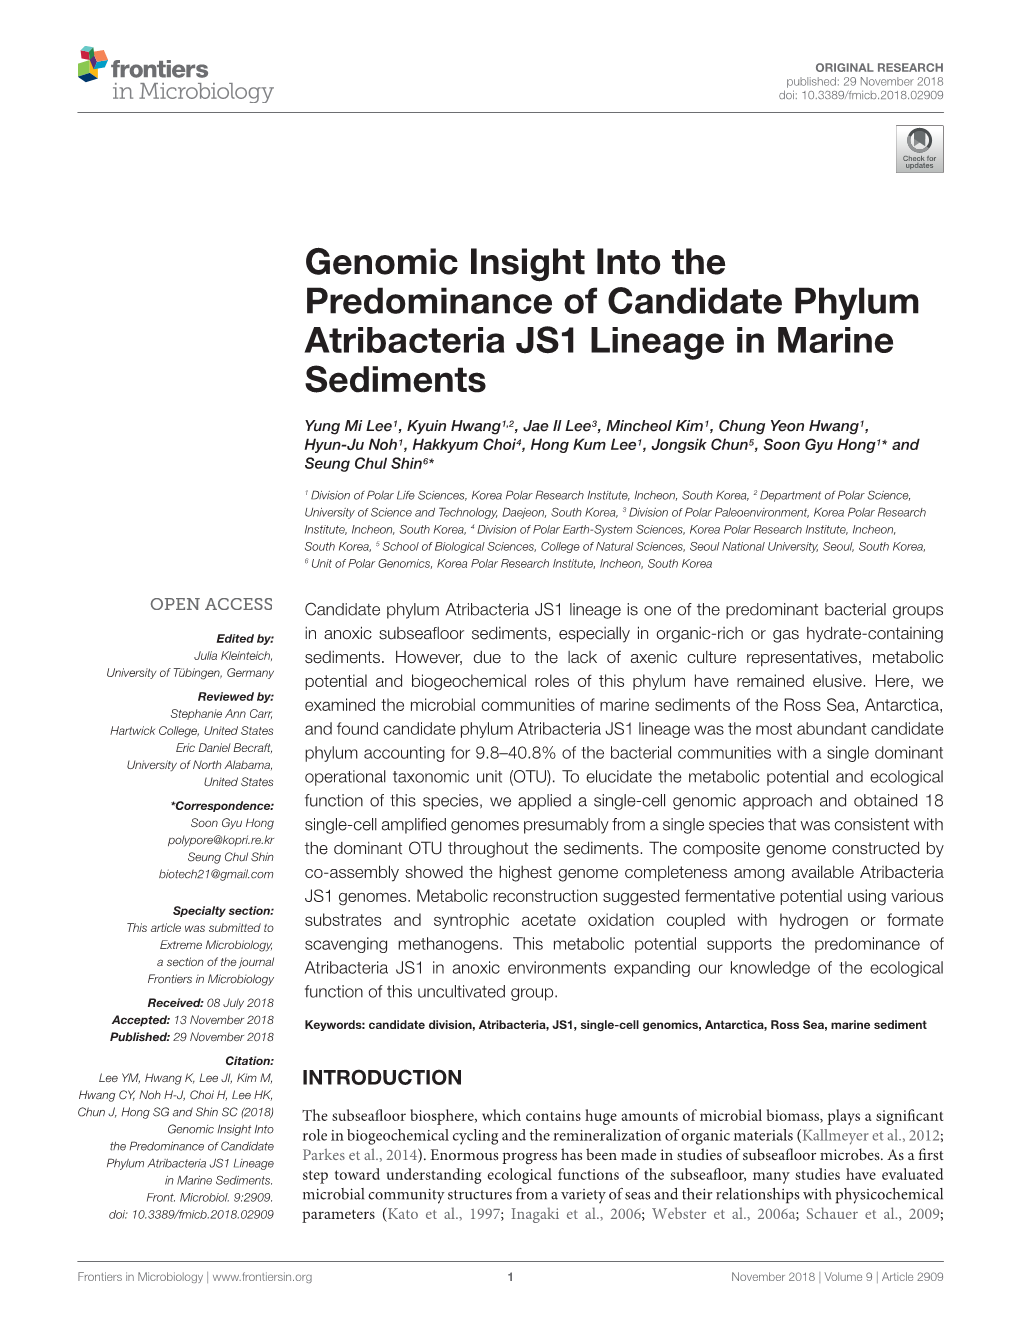 Genomic Insight Into the Predominance of Candidate Phylum Atribacteria JS1 Lineage in Marine Sediments